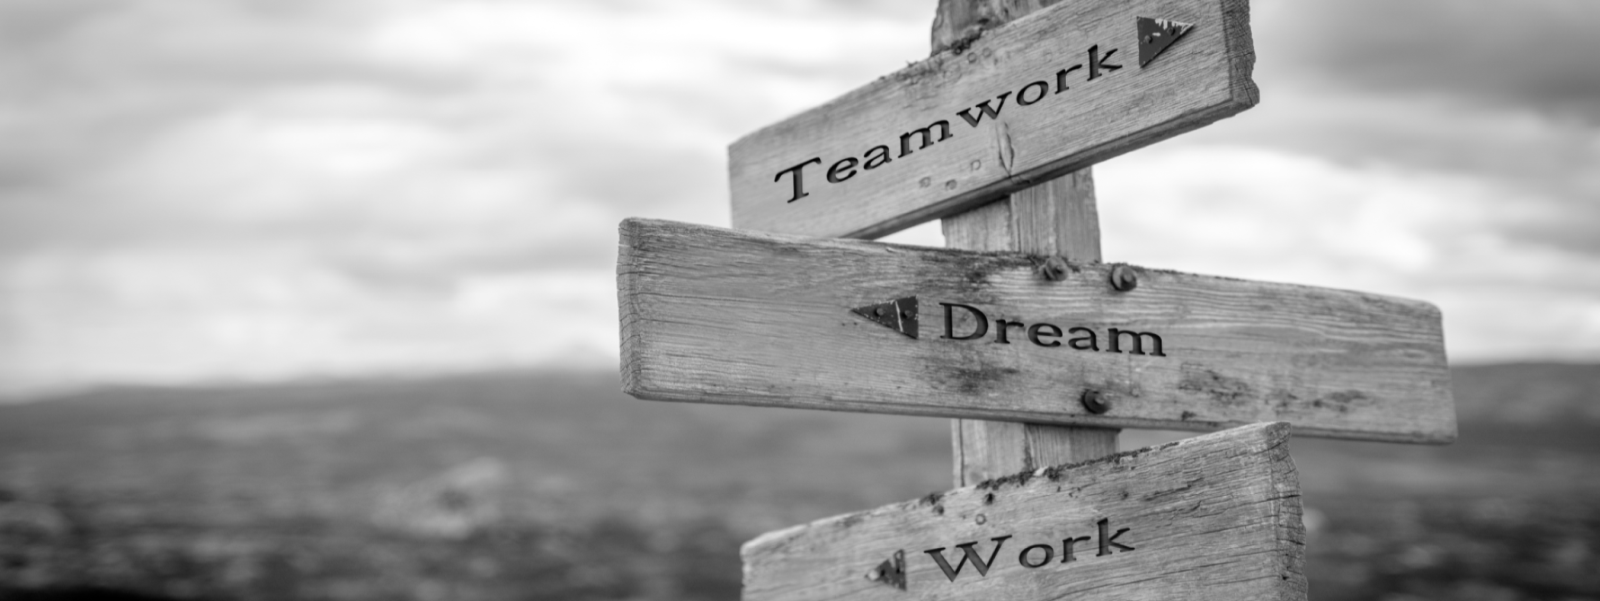 teamwork is dreamwork text quote on wooden signpost outdoors in black and white.